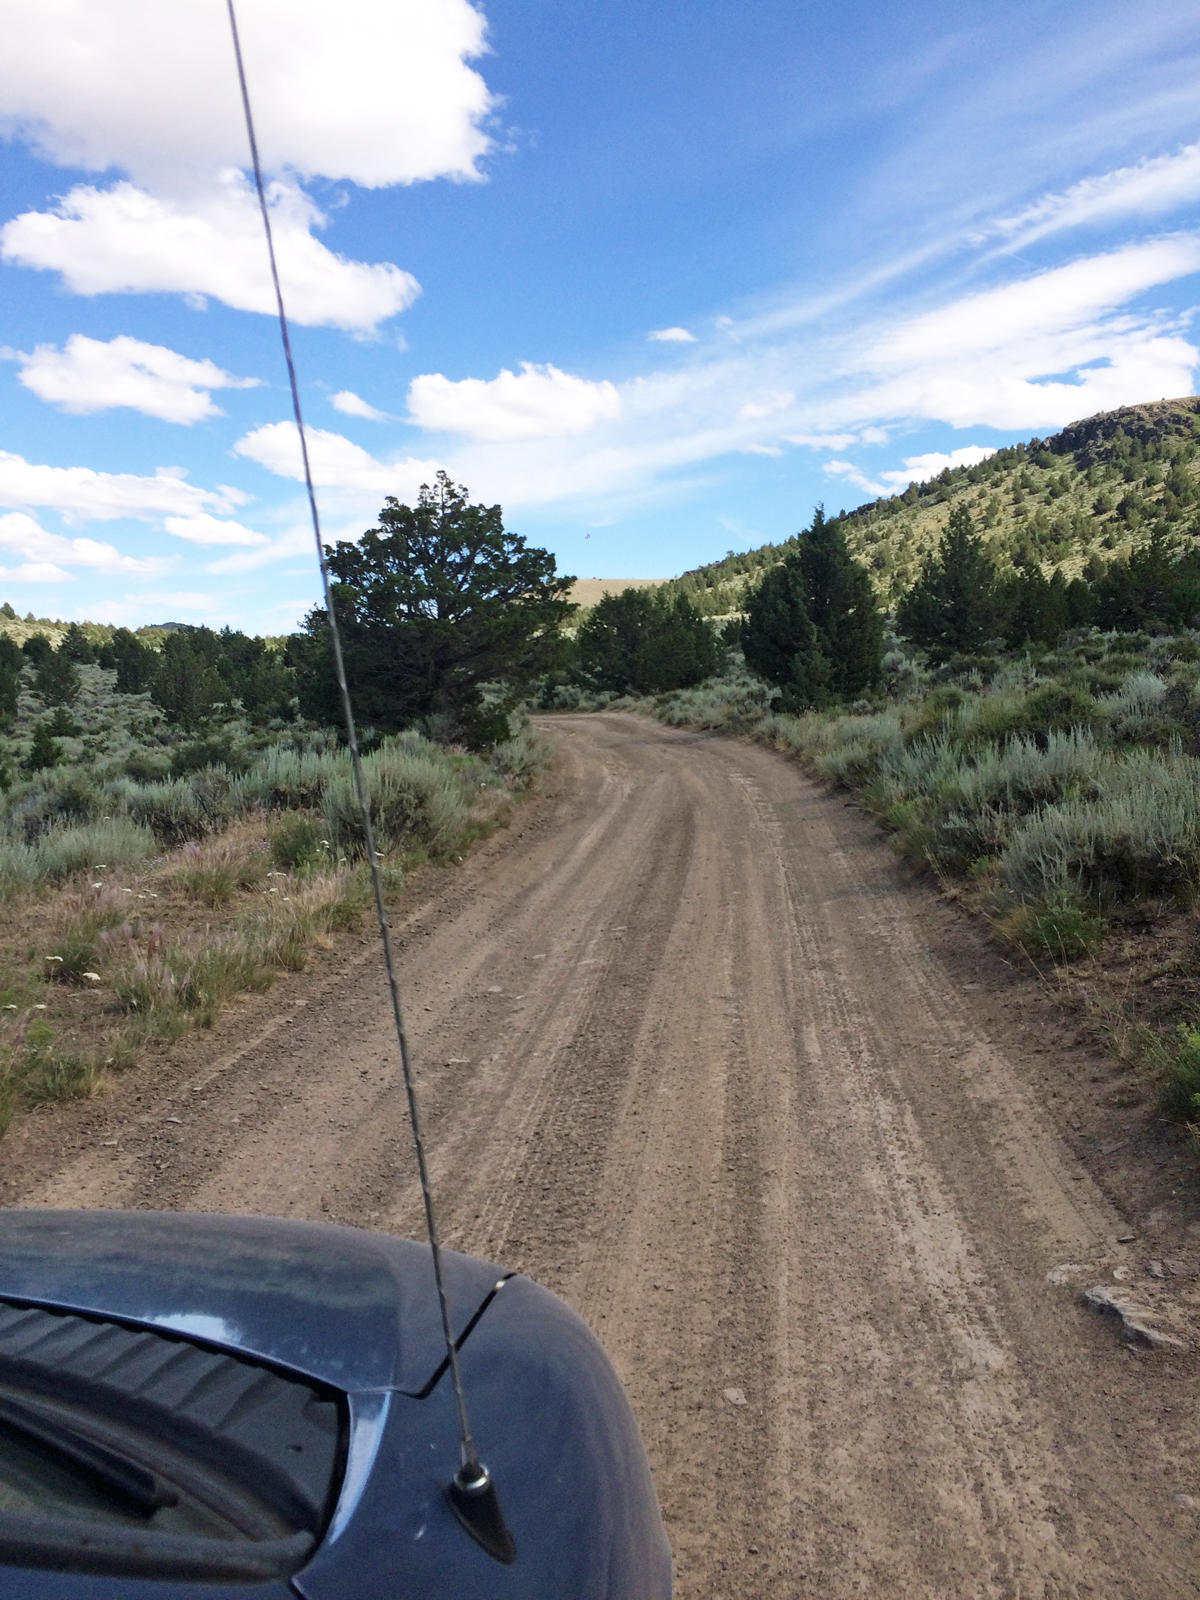 The road at Glass Butte - wide and flat, but sparkling with obsidian